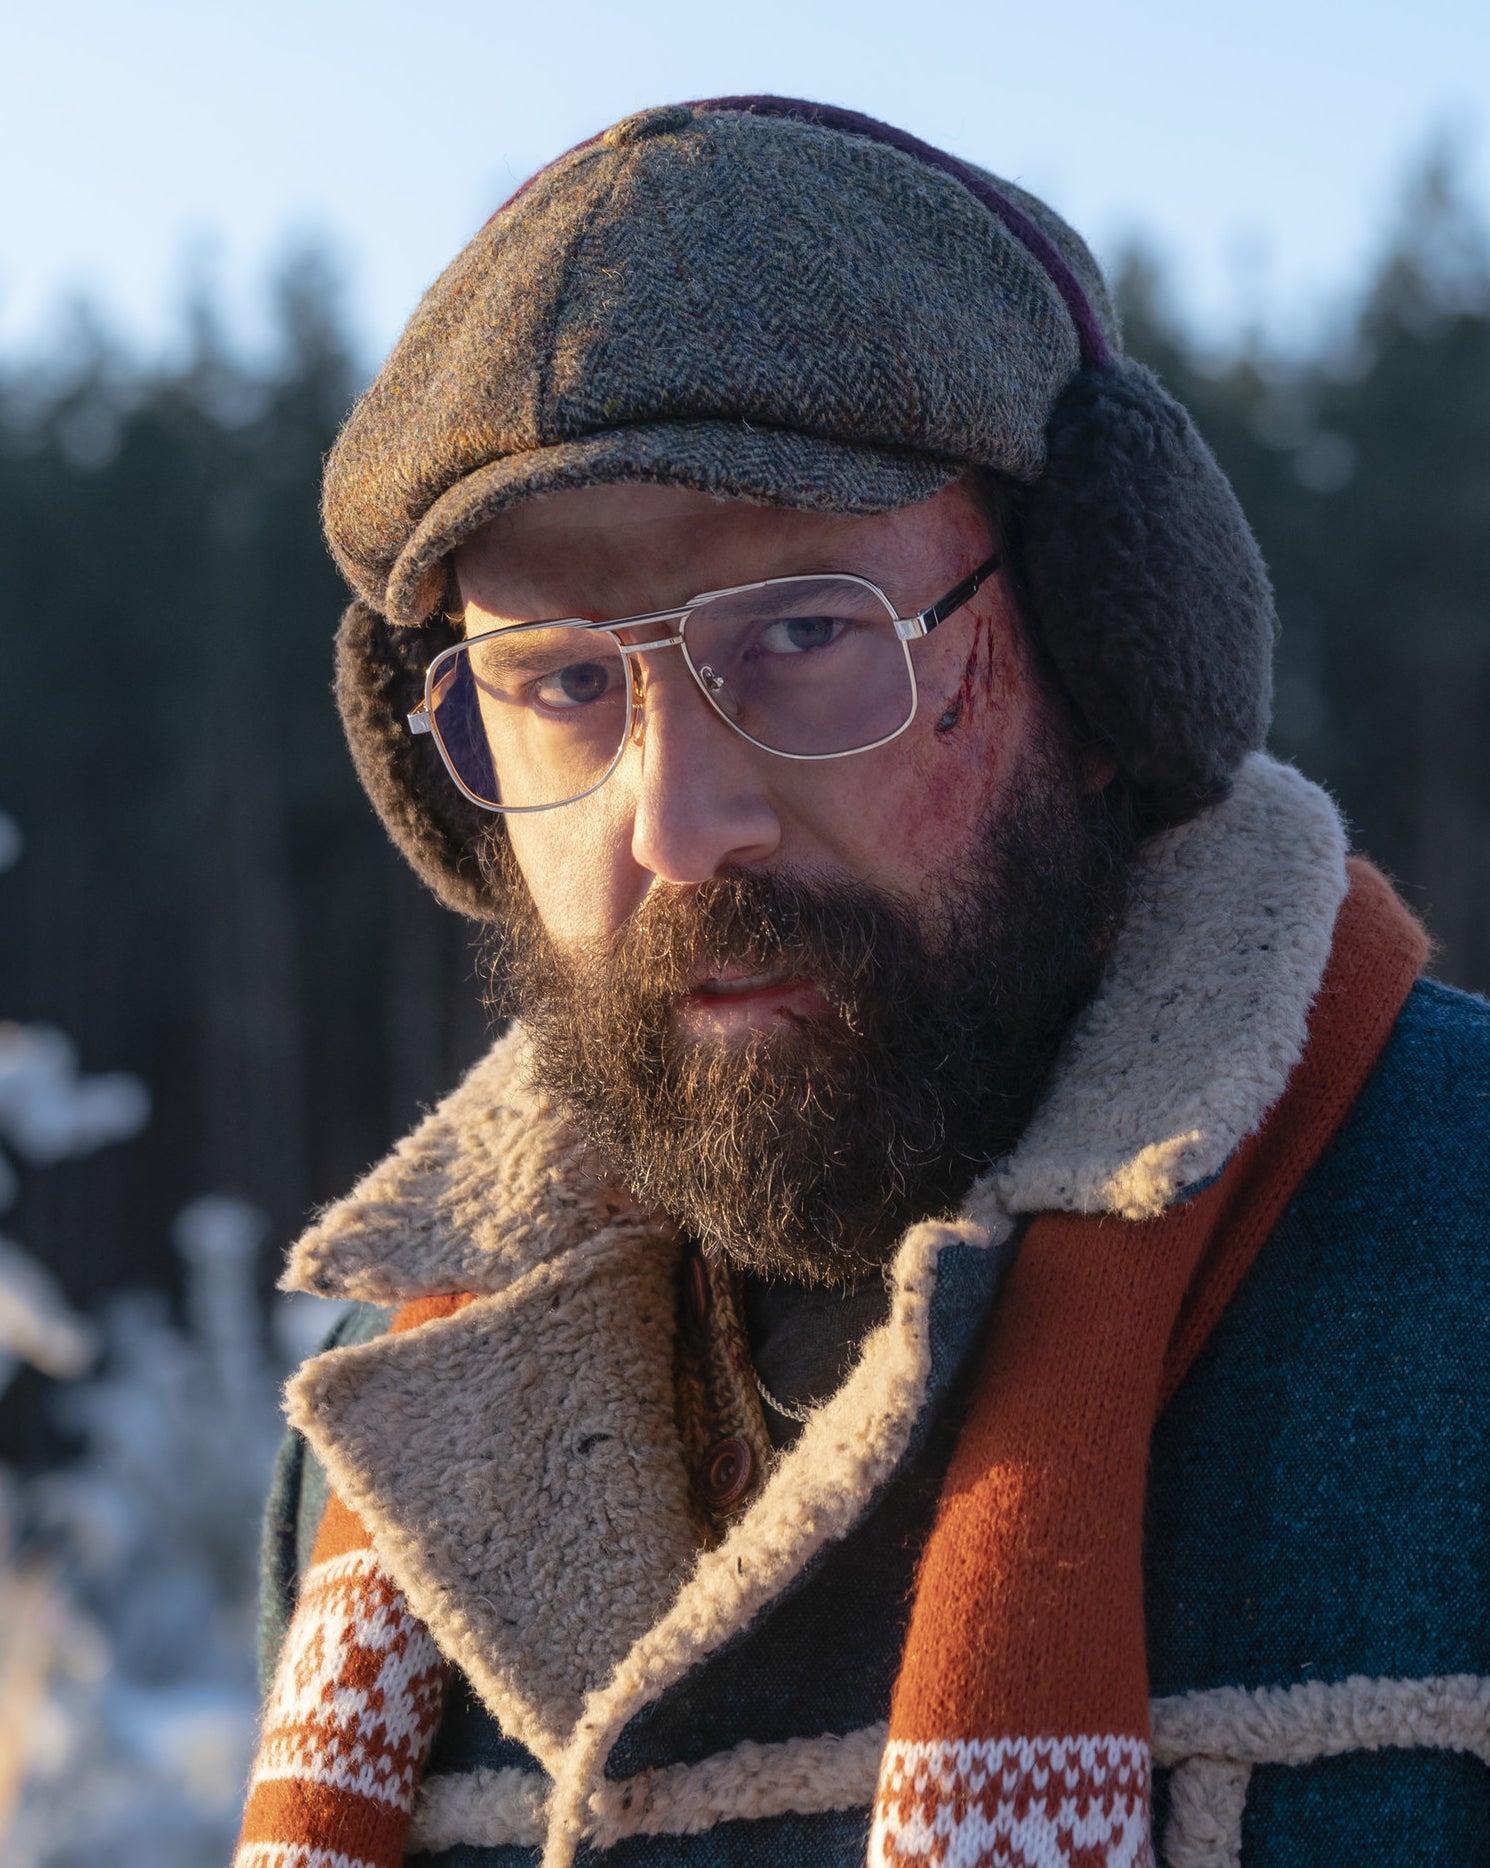 Brett Gelman with a blood-streaked face outside in the snow